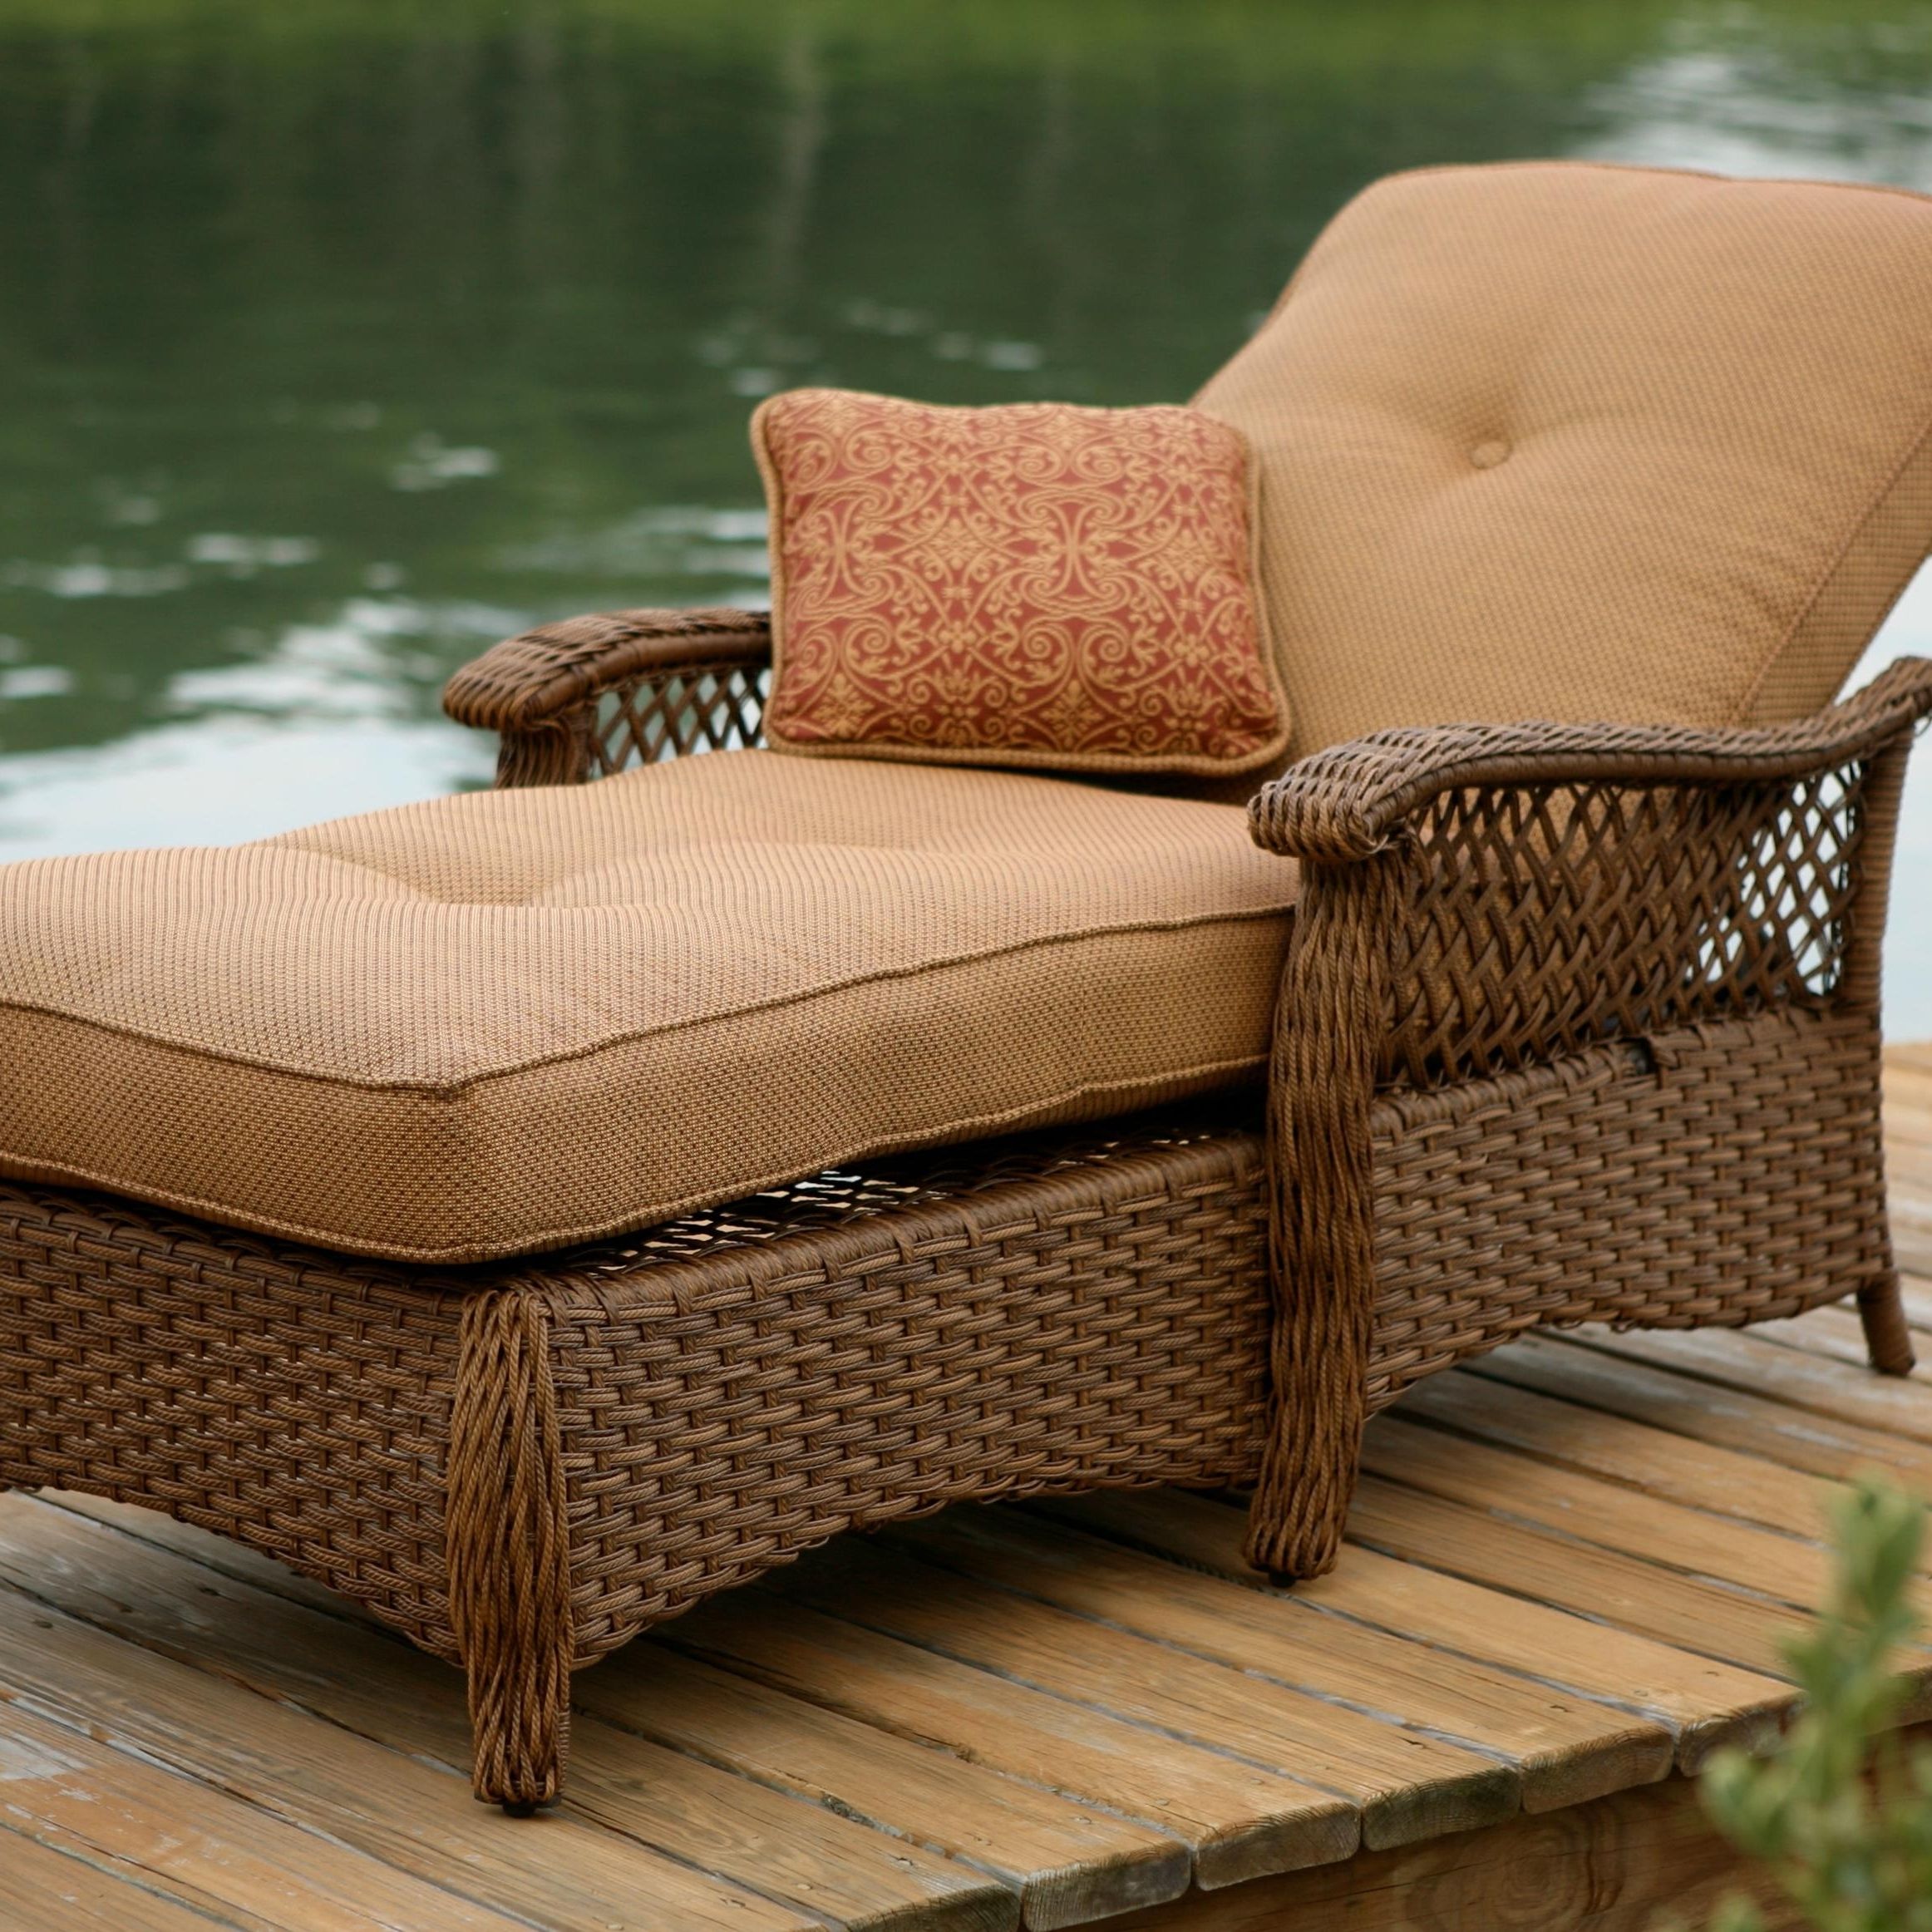 Agio Veranda–agio Outdoor Tan Woven Chaise Lounge Chair With Seat Pertaining To Best And Newest Patio Chaise Lounge Chairs (View 9 of 15)